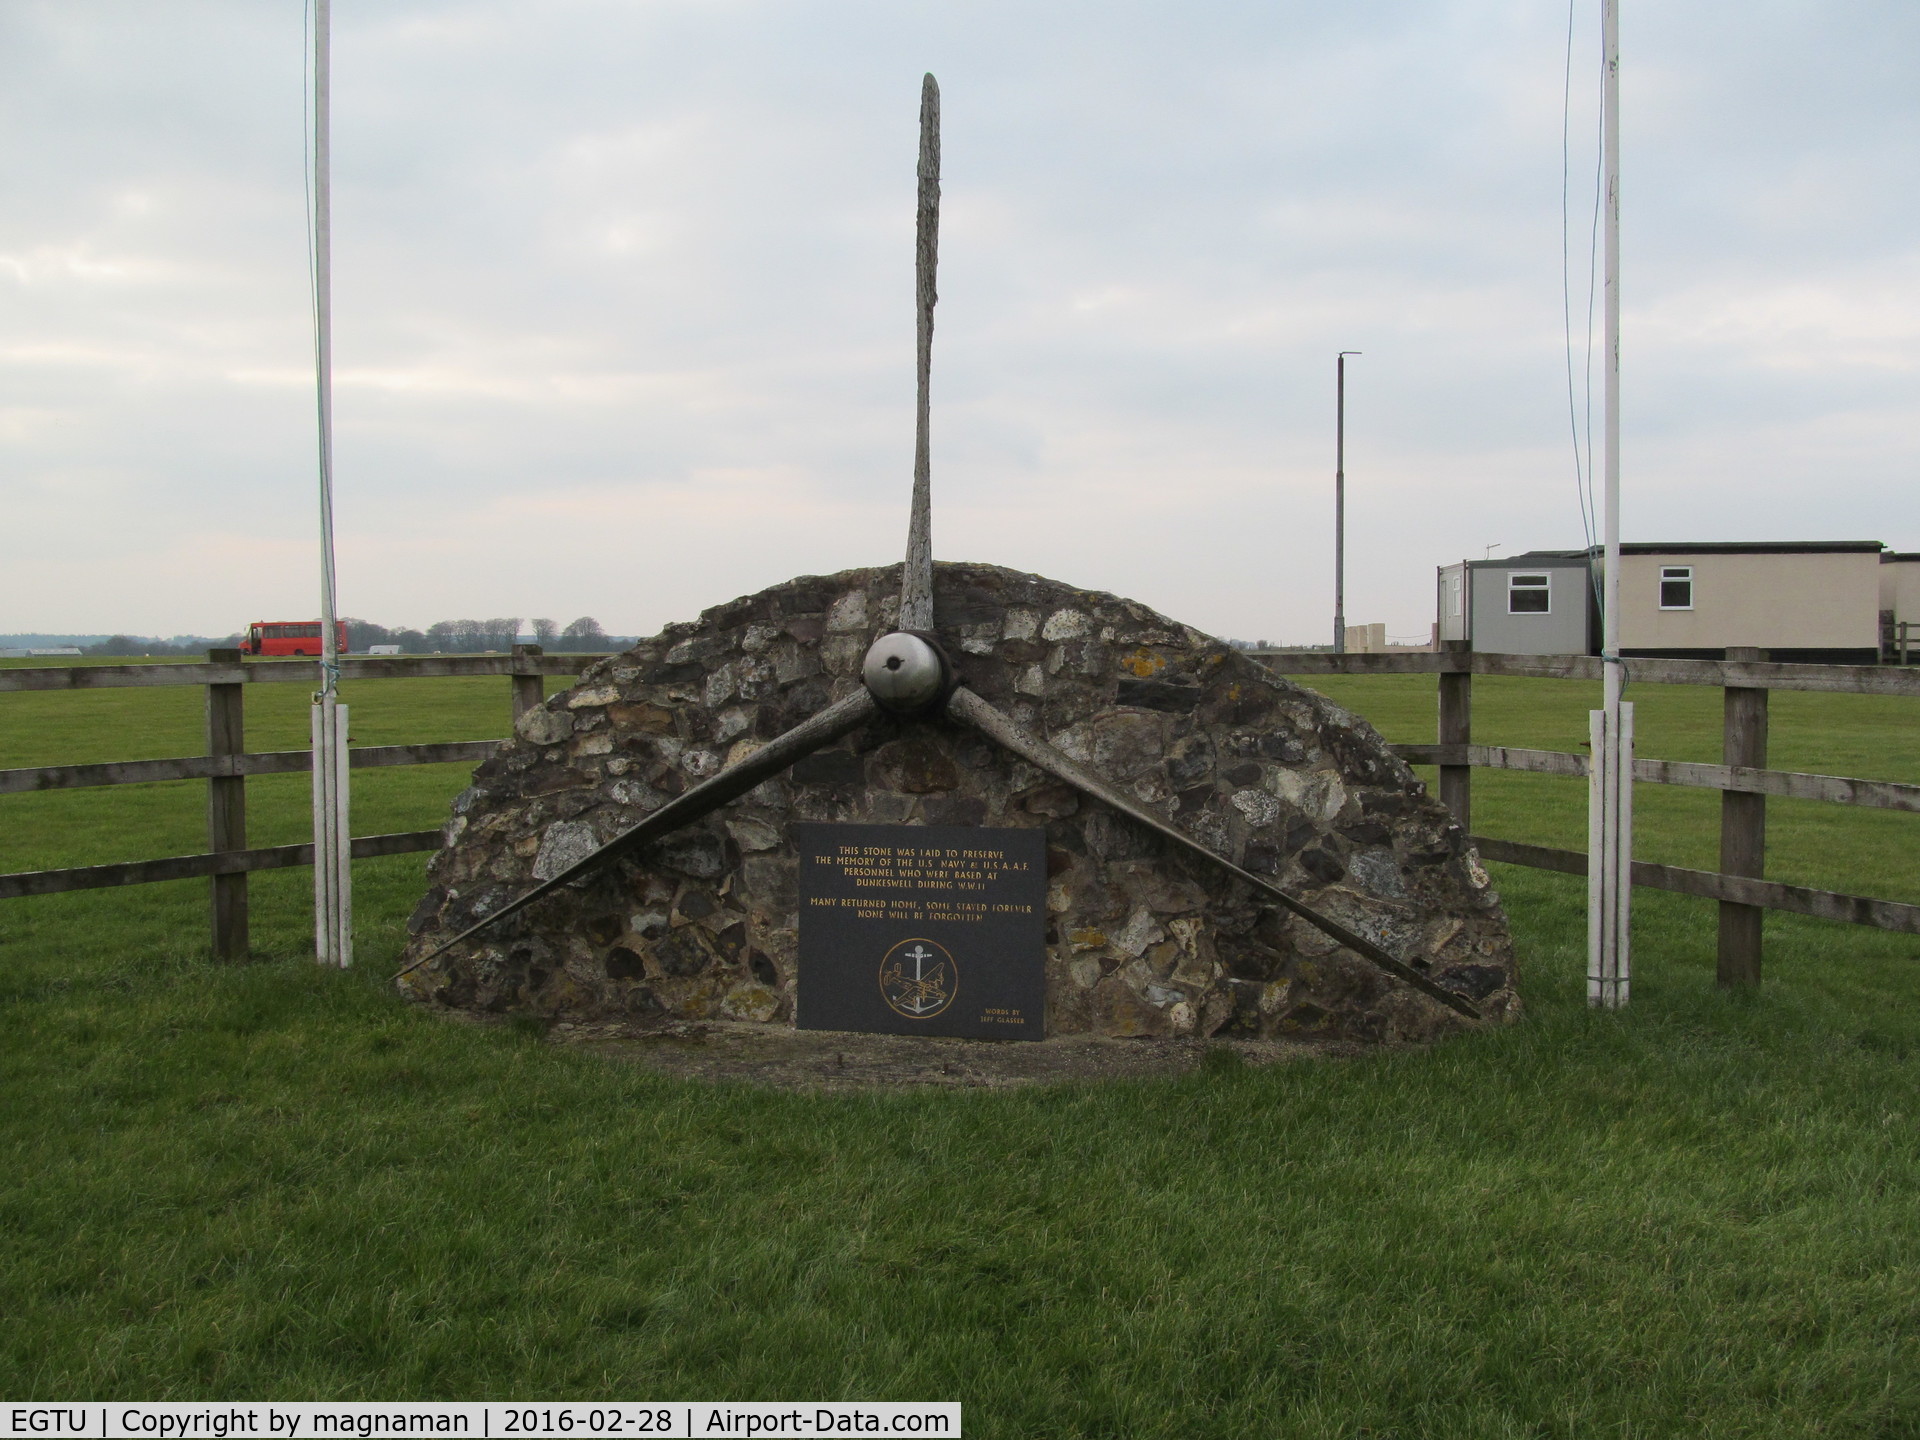 Dunkeswell Aerodrome Airport, Honiton, England United Kingdom (EGTU) - The memorial to the US Air Force (and I think Canadian) based here during WW2